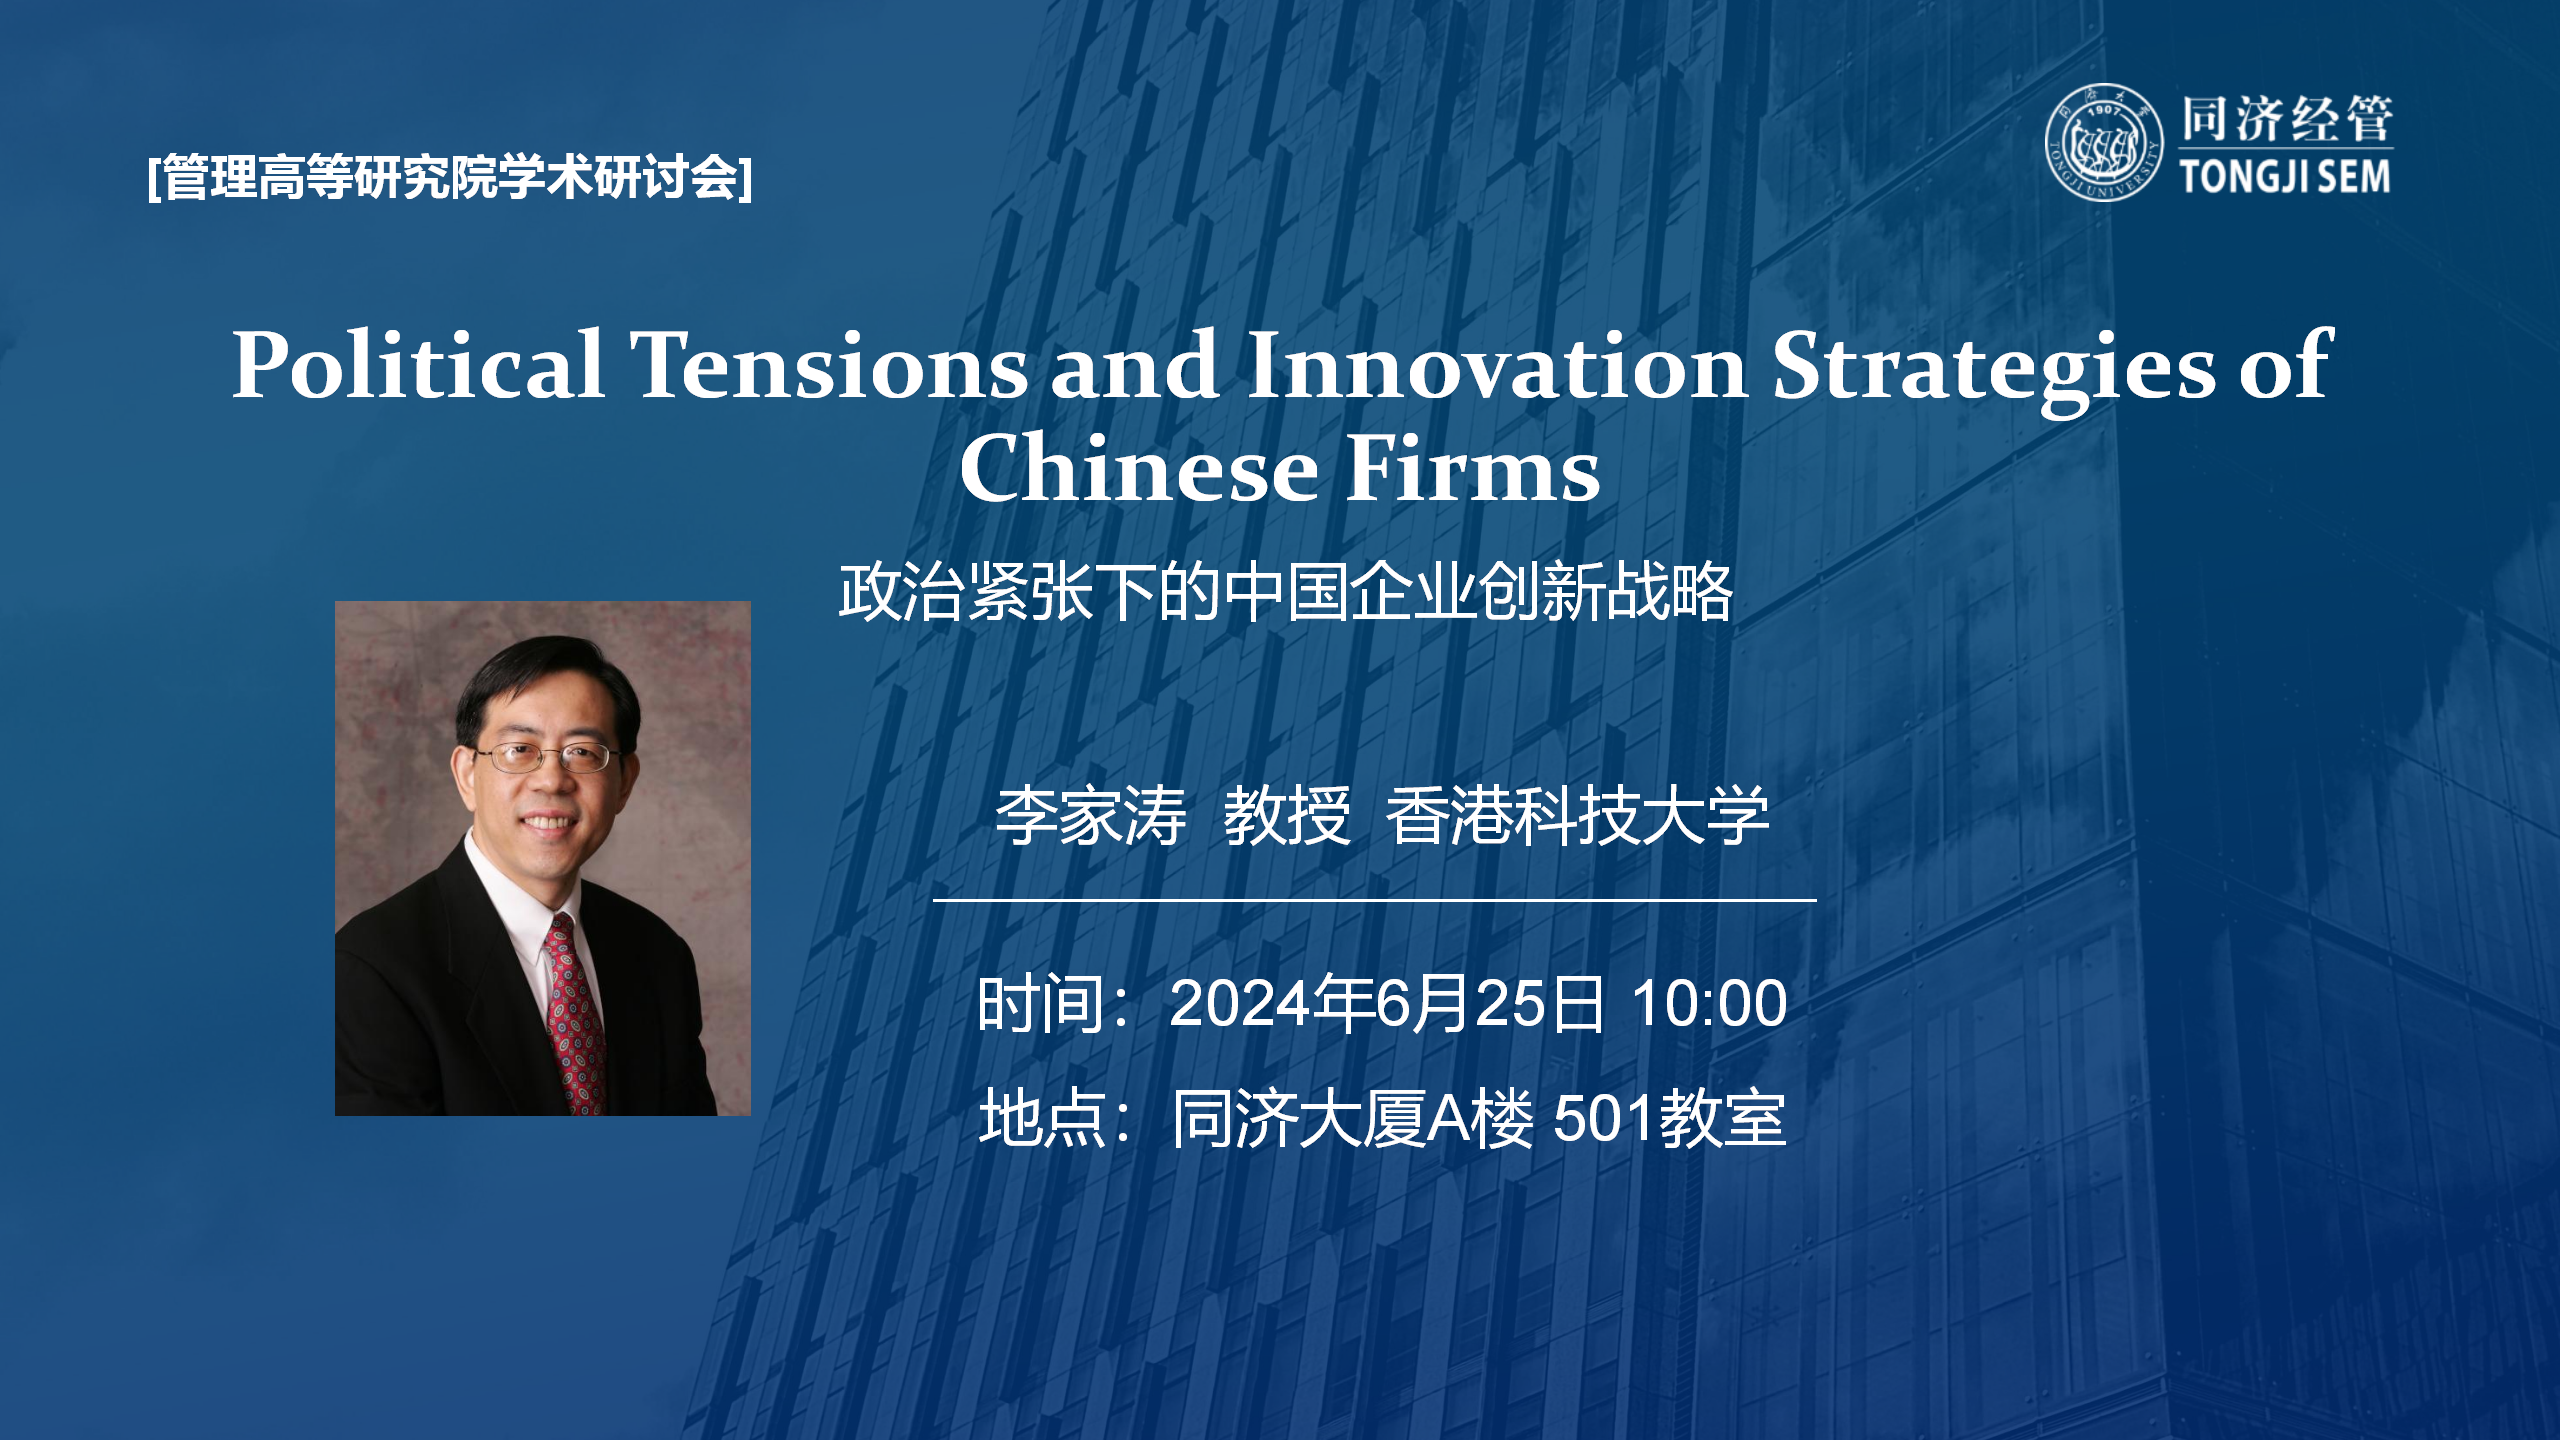 Political Tensions and Innovation Strategies of Chinese Firms